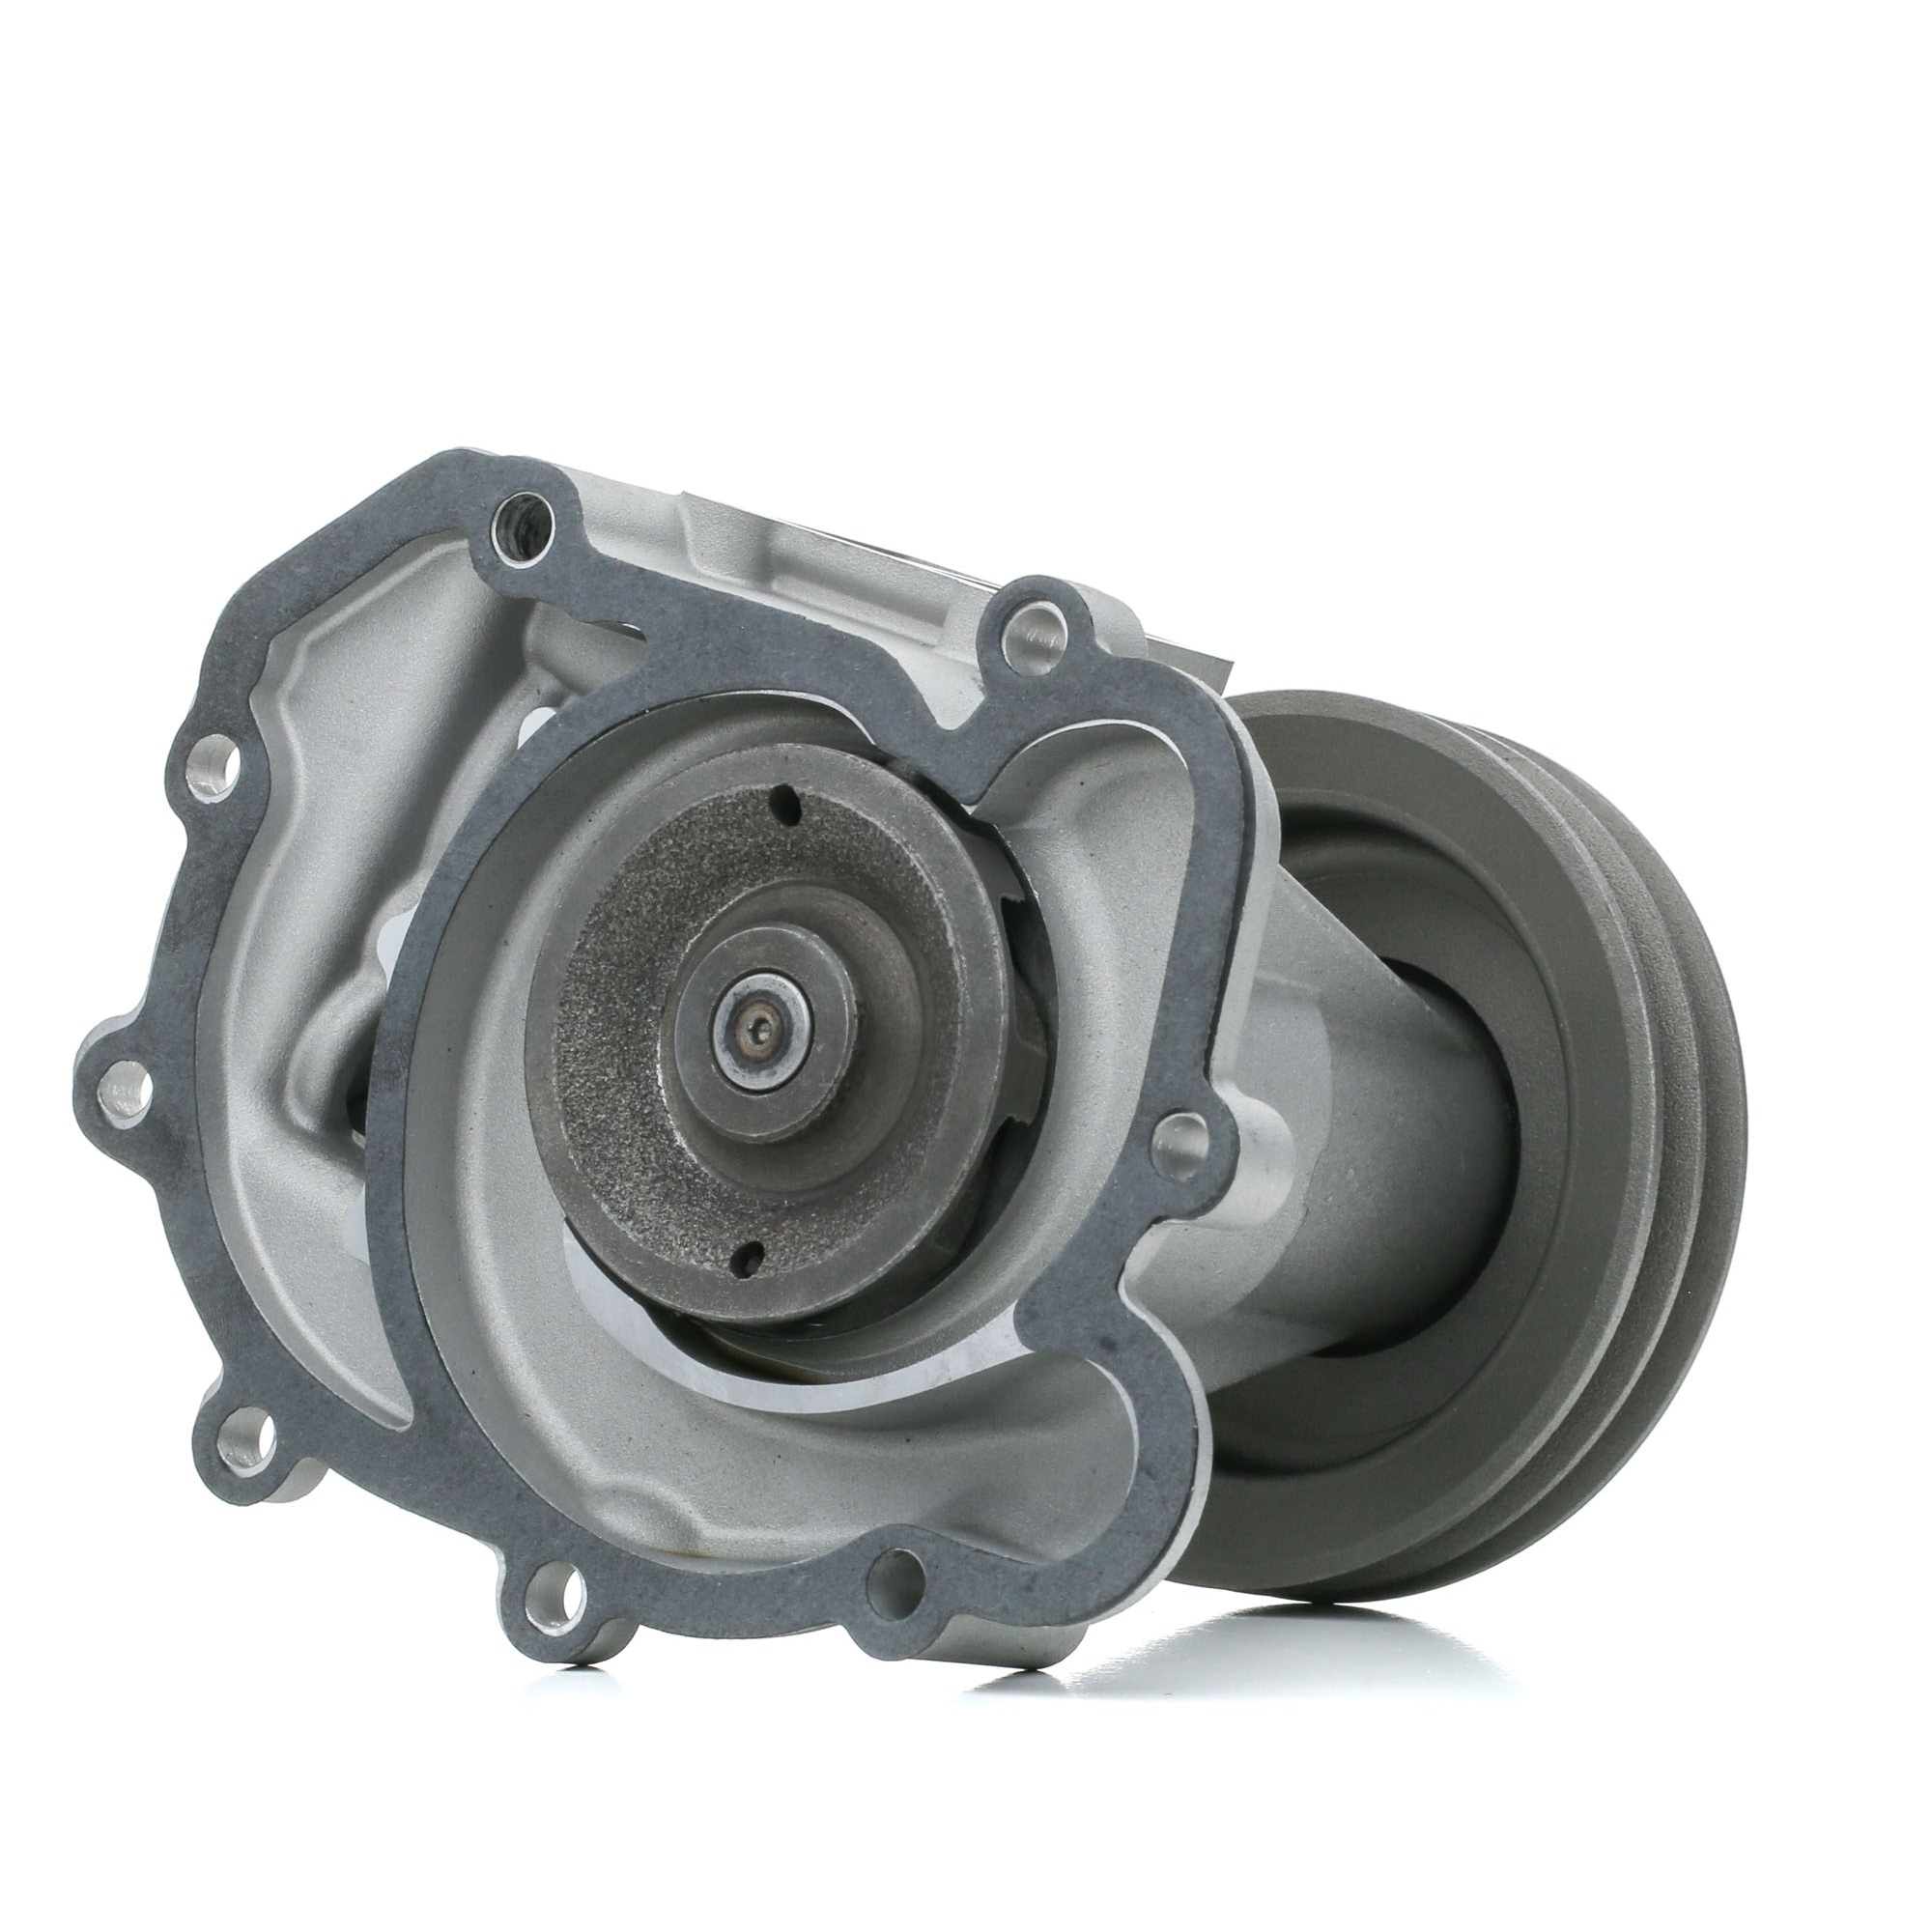 RIDEX 1260W0390 Water pump Number of Teeth: 2, Cast Aluminium, with double pulley, with gaskets/seals, Metal, for v-belt use